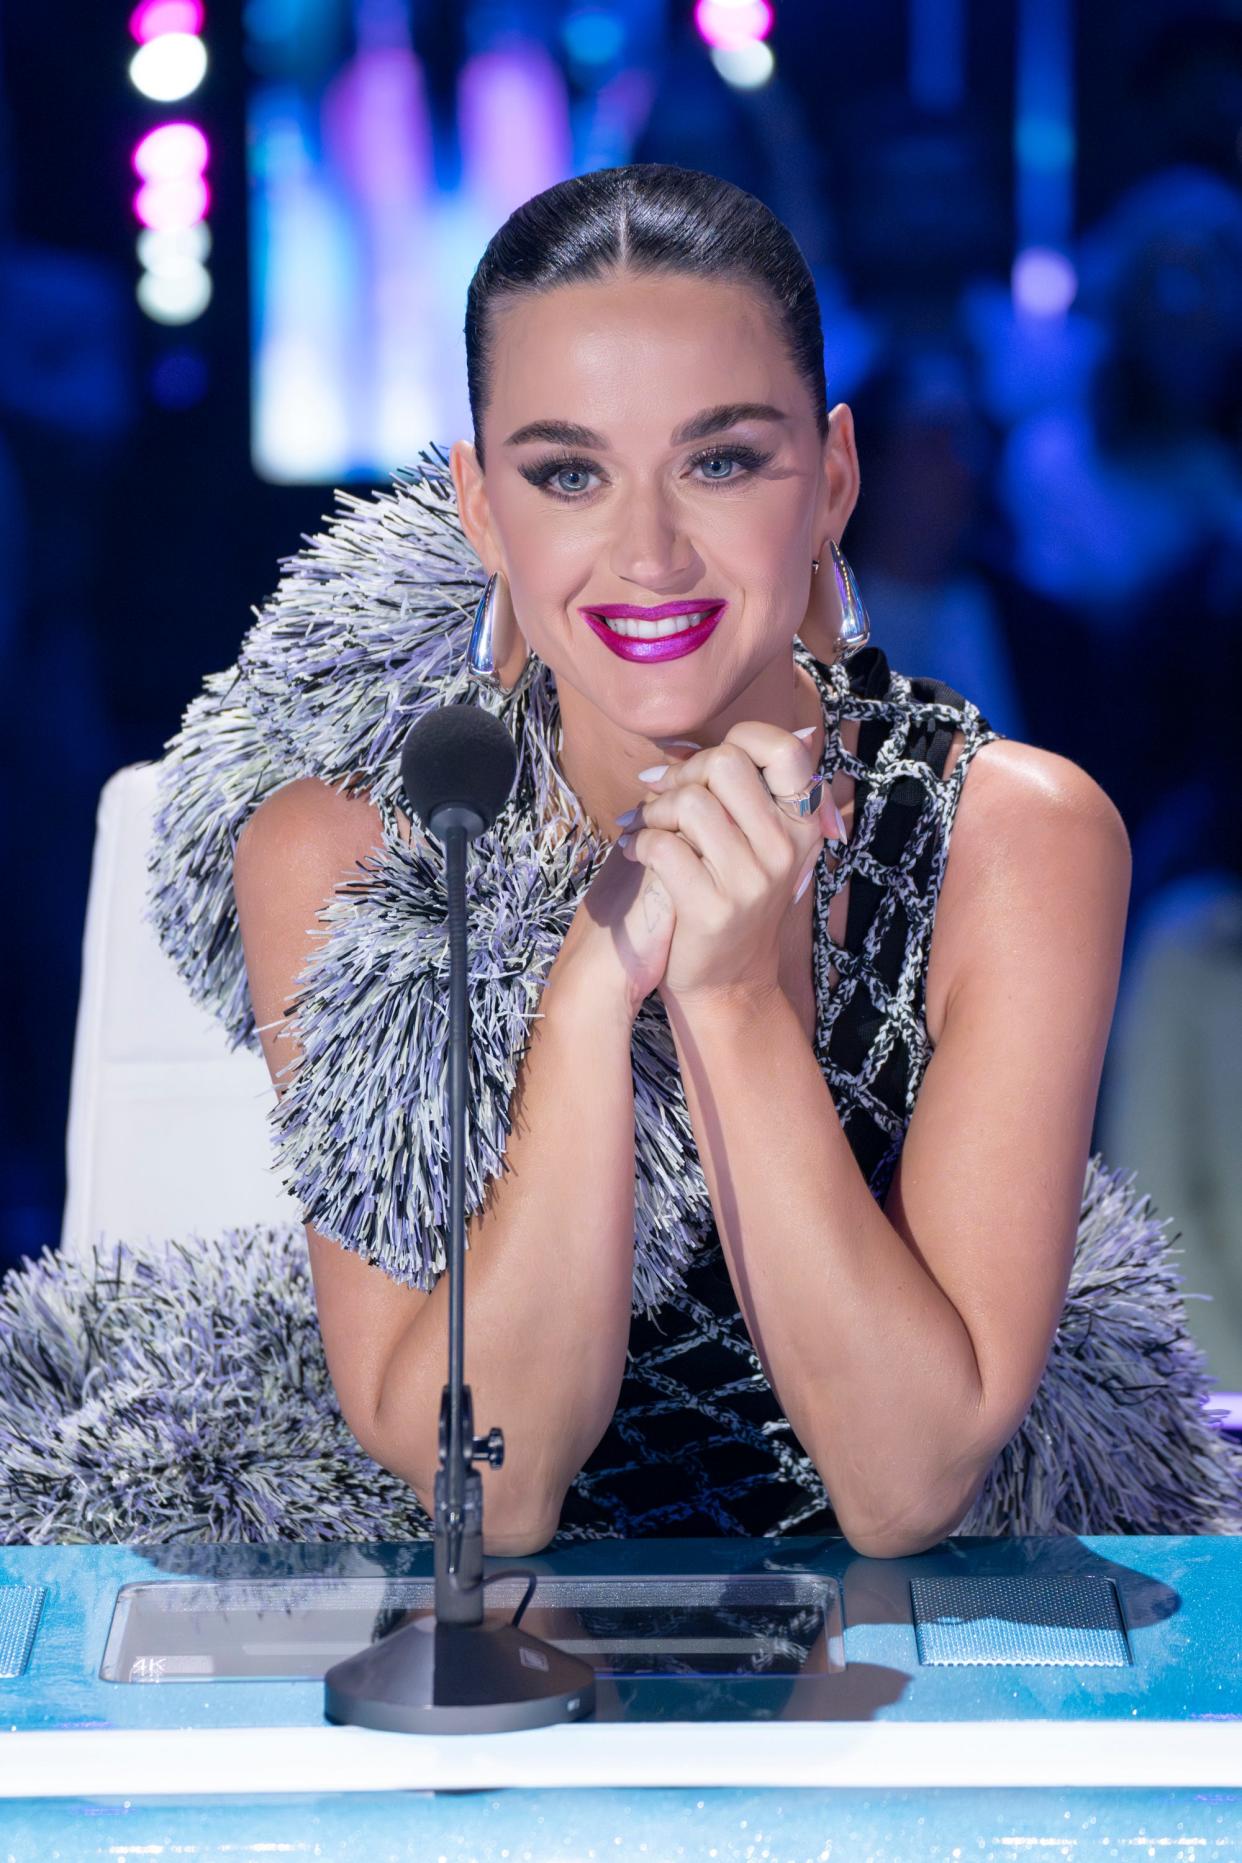 Katy Perry will not return to "American Idol" after season 22.